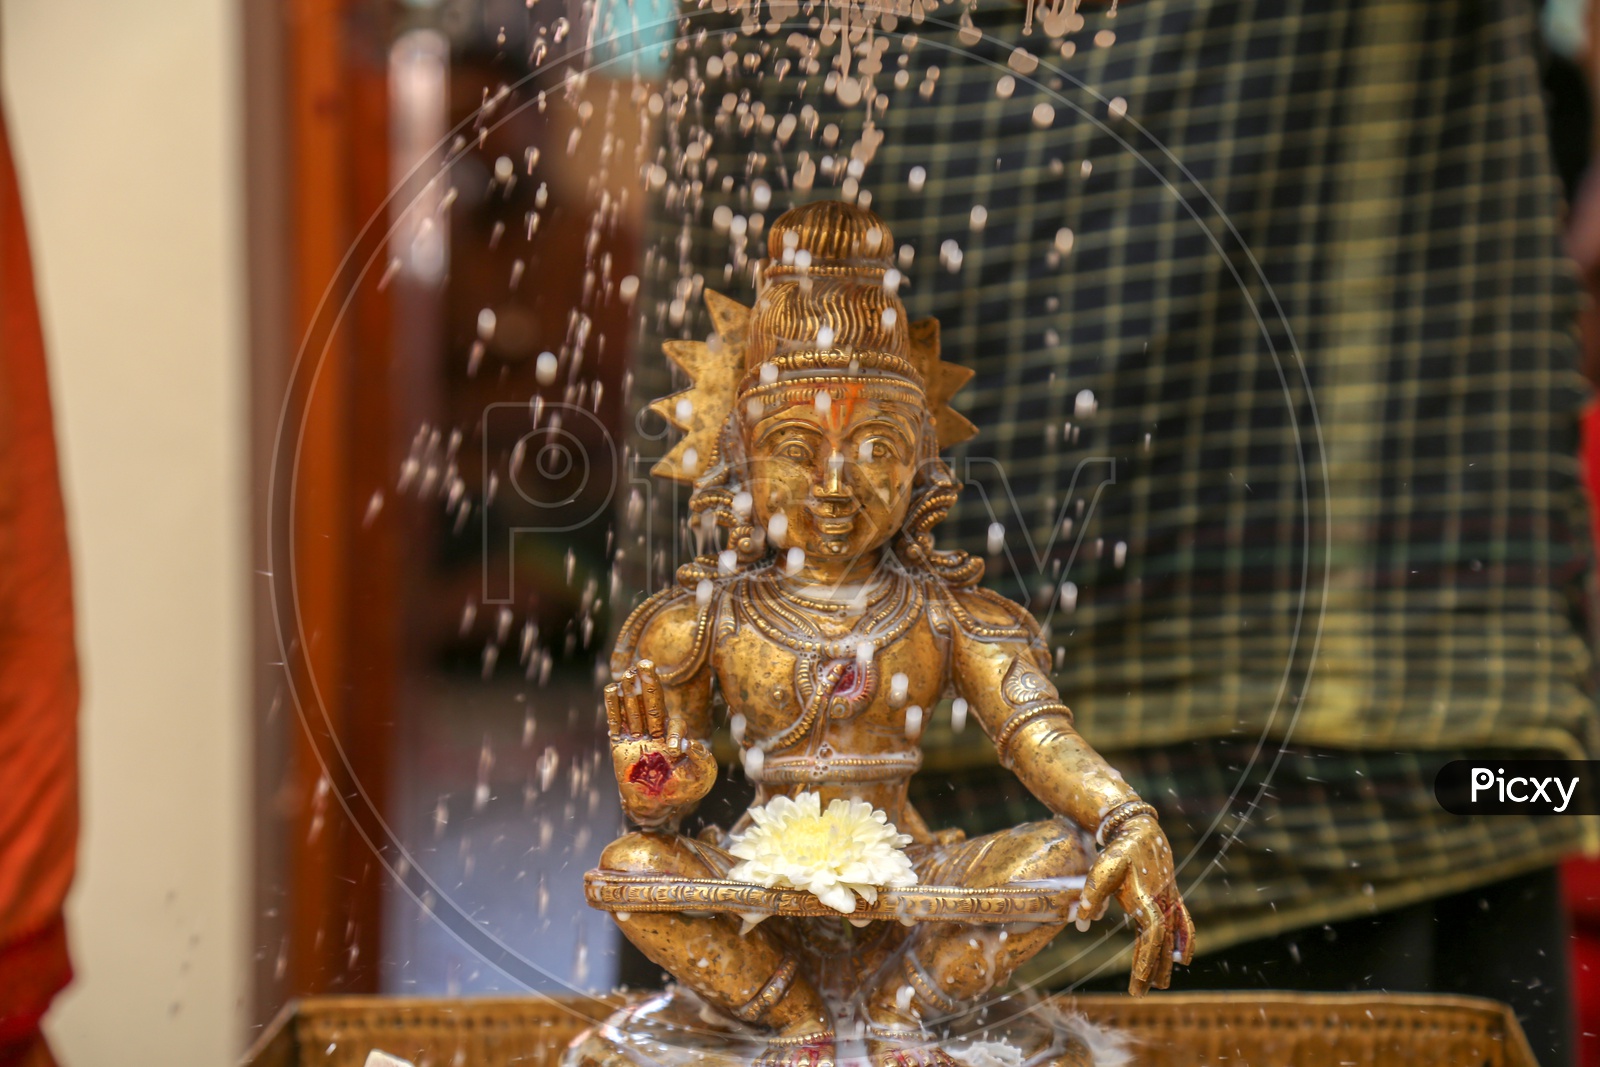 palabhishekam is the showering of milk on  Lord Ayyappa